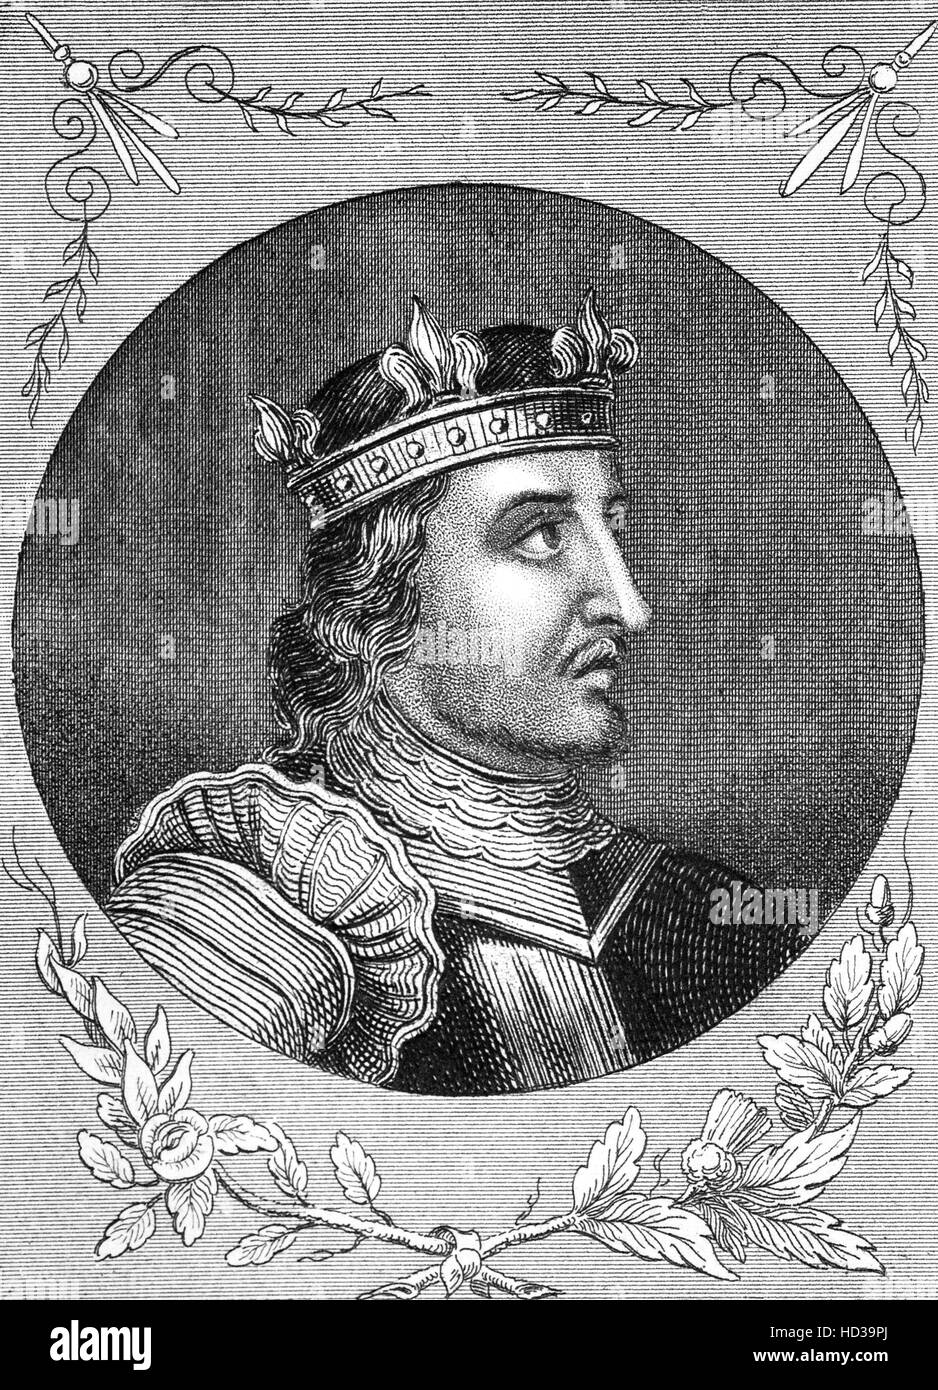 Stephen (1092 – 1154), often referred to as Stephen of Blois, was a grandson of William the Conqueror. He was King of England from 1135 to his death, and also the Count of Boulogne in right of his wife. Stephen's reign was marked by the Anarchy, a civil war with his cousin and rival, the Empress Matilda. Stock Photo